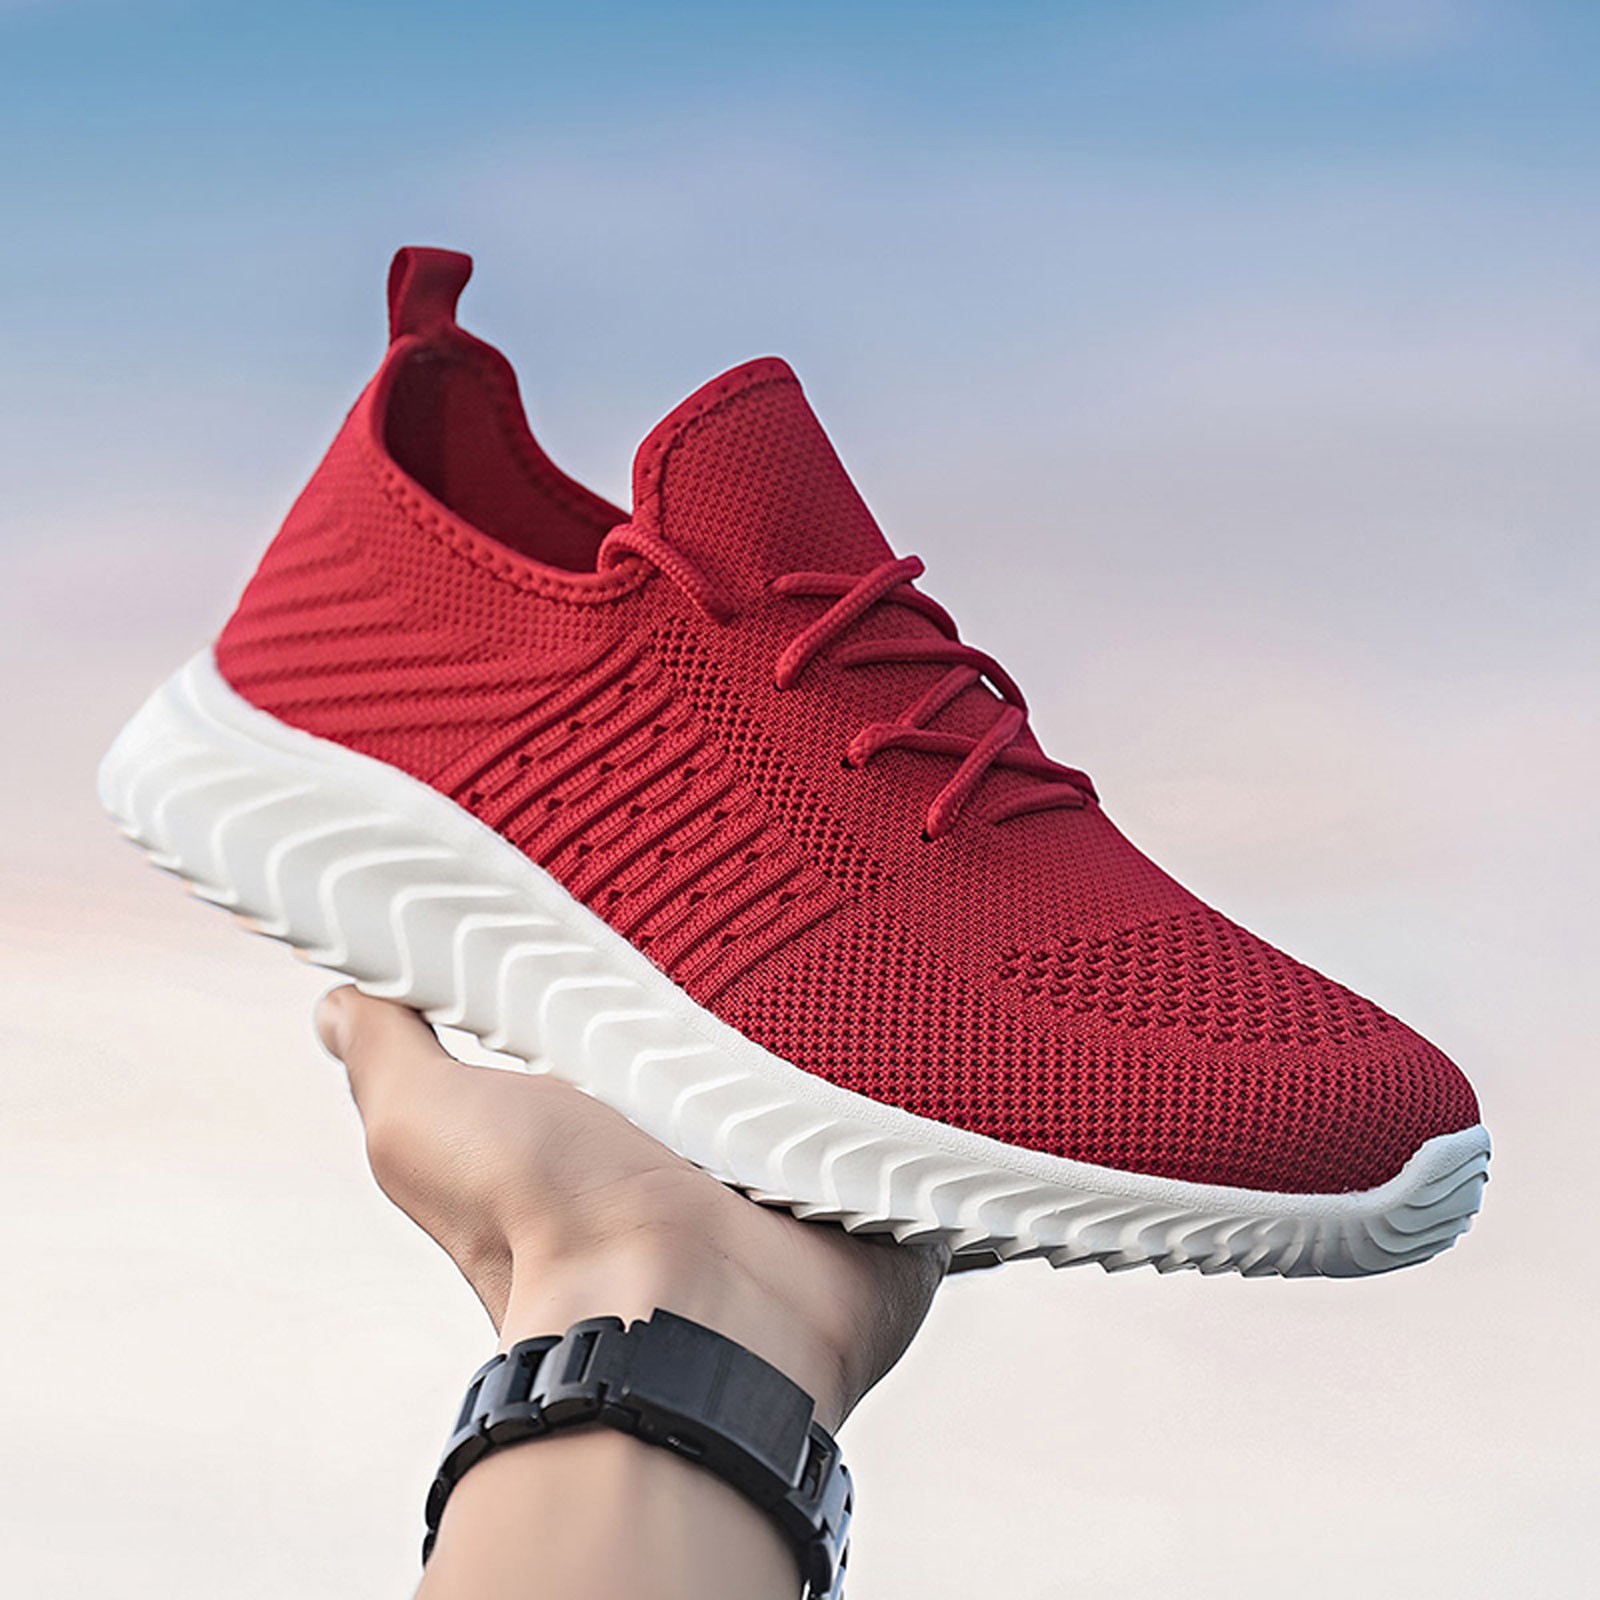 CBGELRT Shoes for Men Casual Men's Sneakers Work Tennis Shoes for Men Sneakers Men Lace Mesh Soft Fashion Color Bottom up Sport Shoes Casual Breathable Solid Men's Sneakers Male Red 45 - image 4 of 4